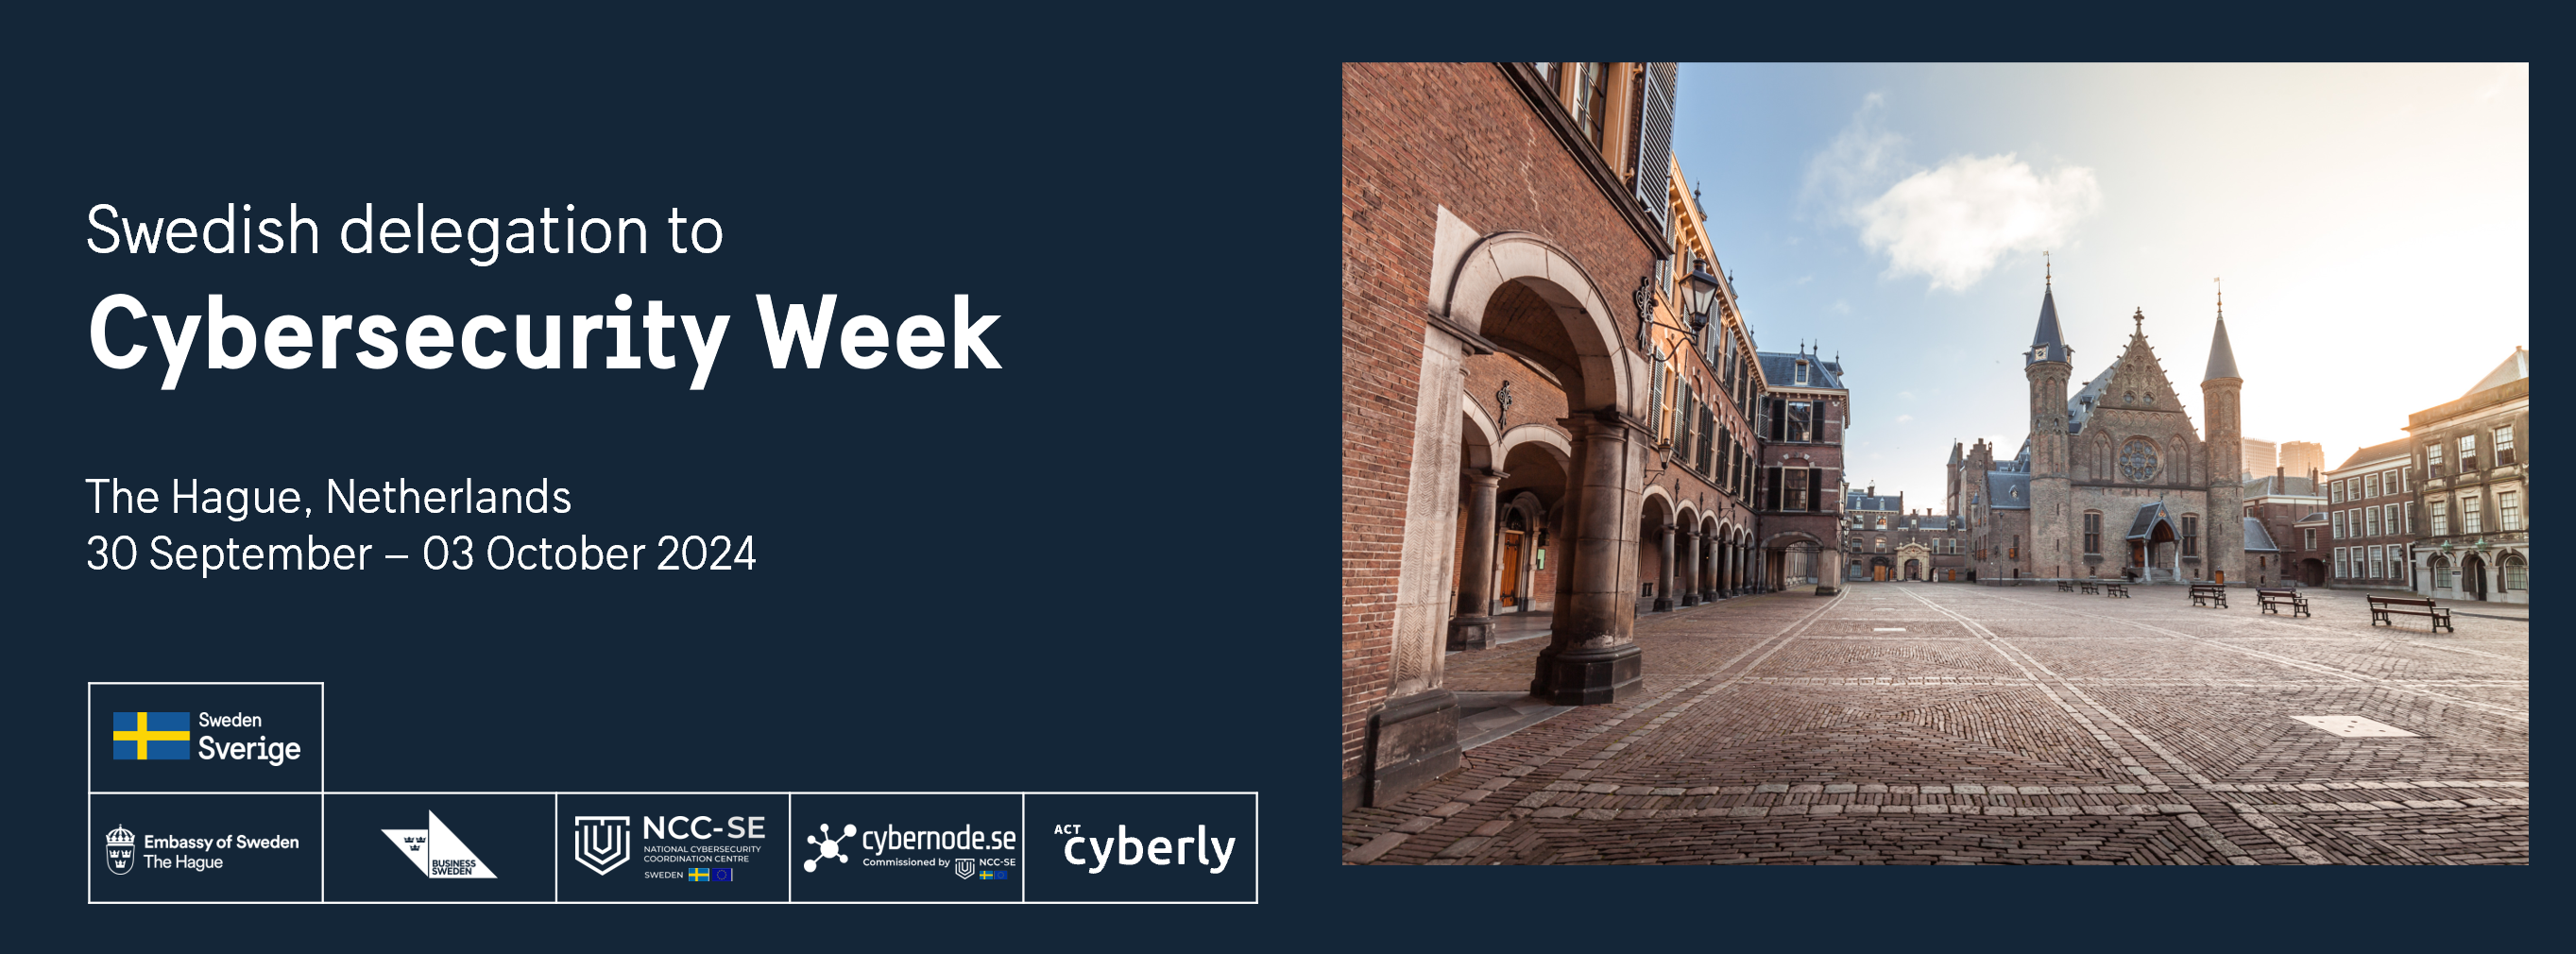 Header image for Swedish Delegation to Cybersecurity Week 2024